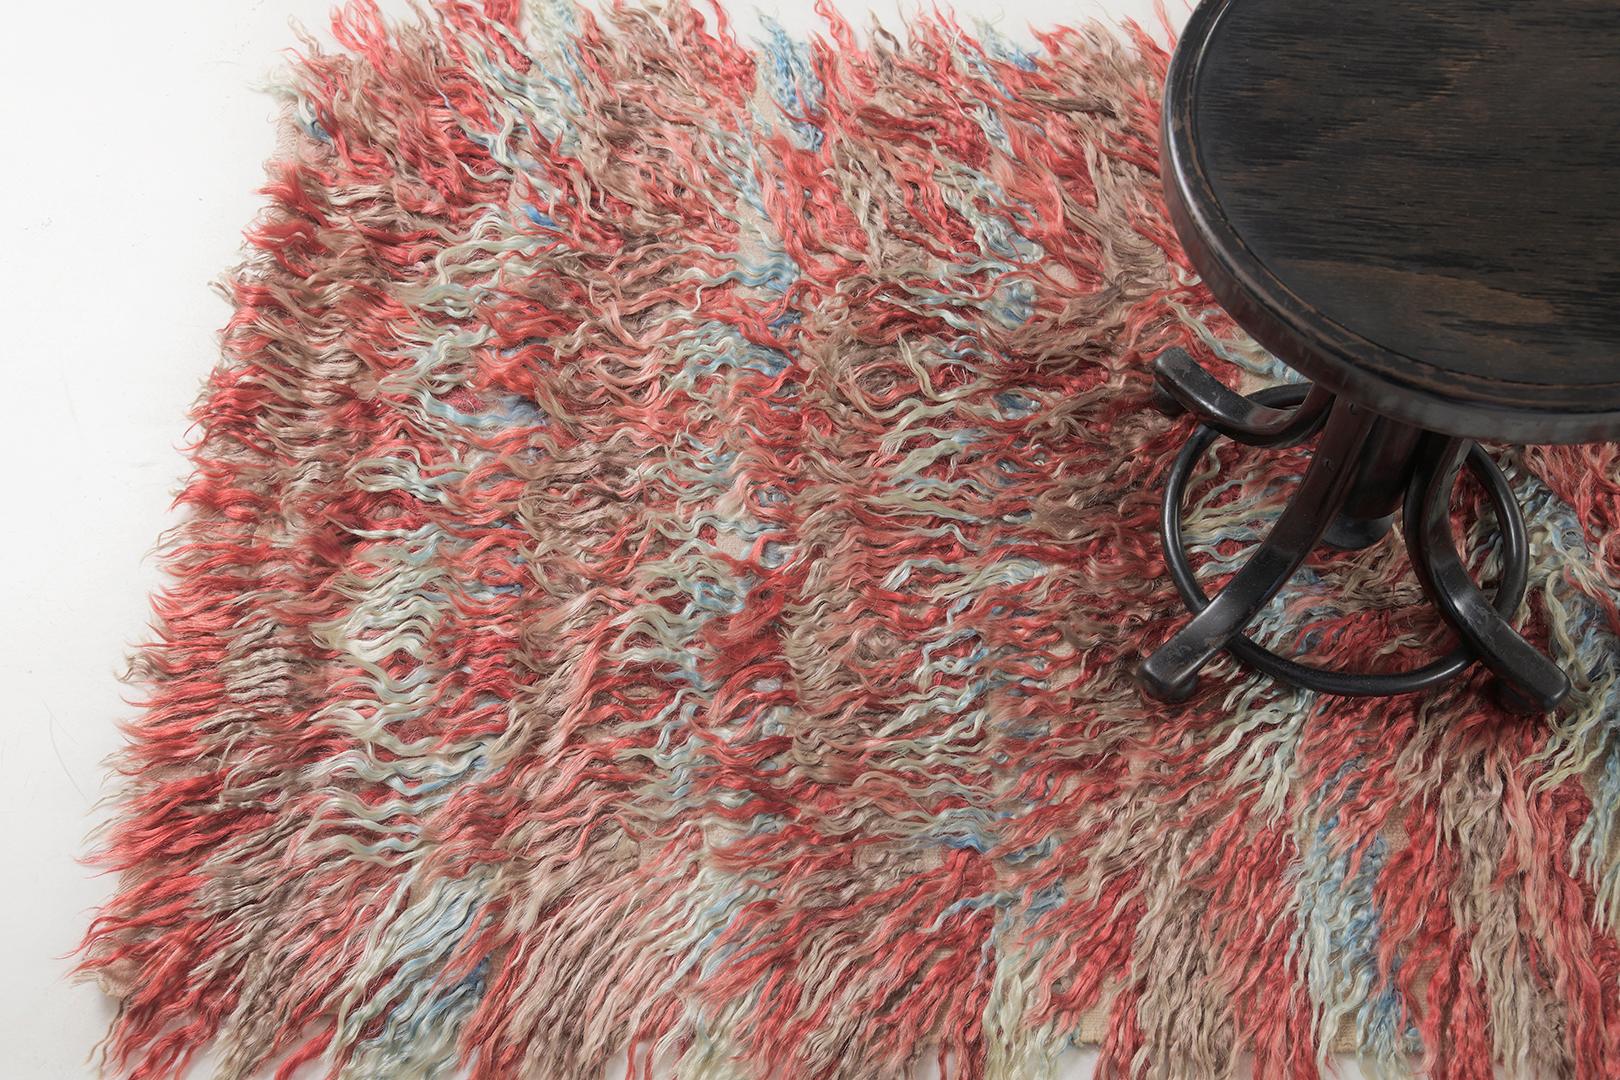 Tulu is a gorgeous wool shag that features amazing layers of variegated tones of blue and red. It augments the stunning scenery and all will be loved by the next generation. Turkish Anatolian rugs weave together dyes and colors, motifs, textures,